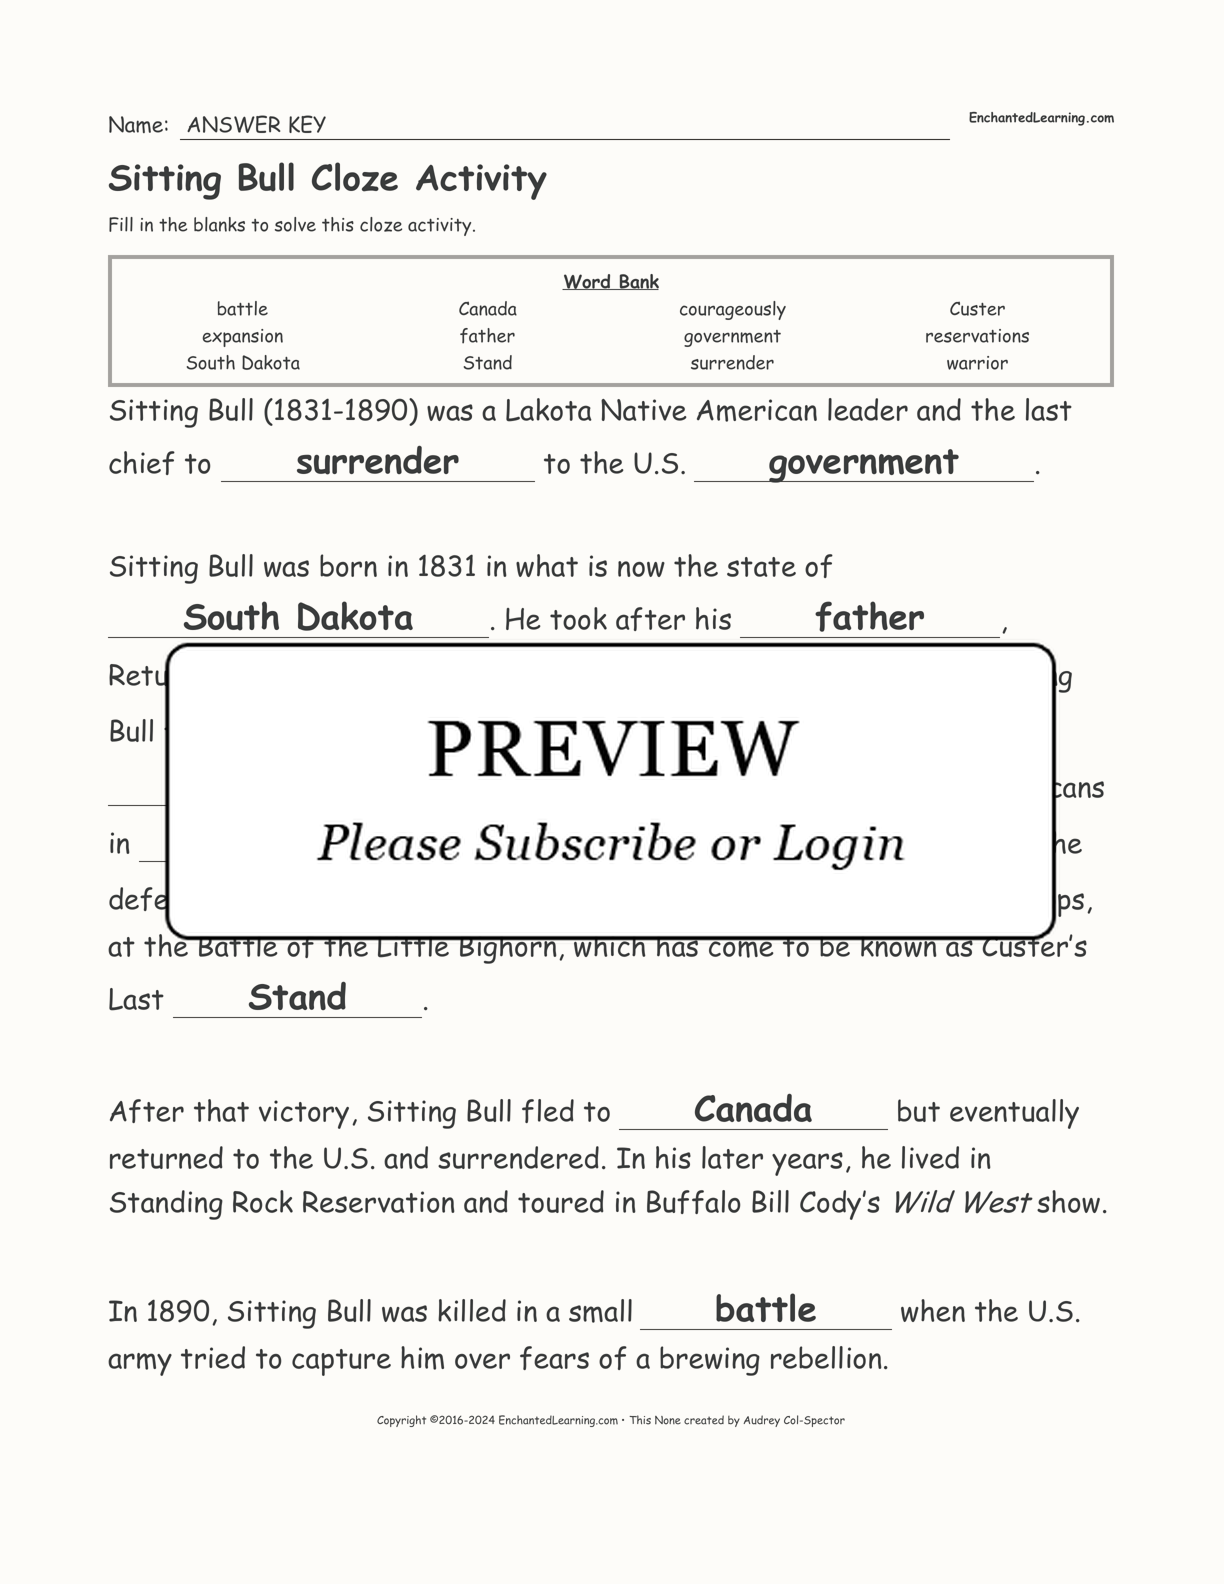 Sitting Bull Cloze Activity interactive worksheet page 2